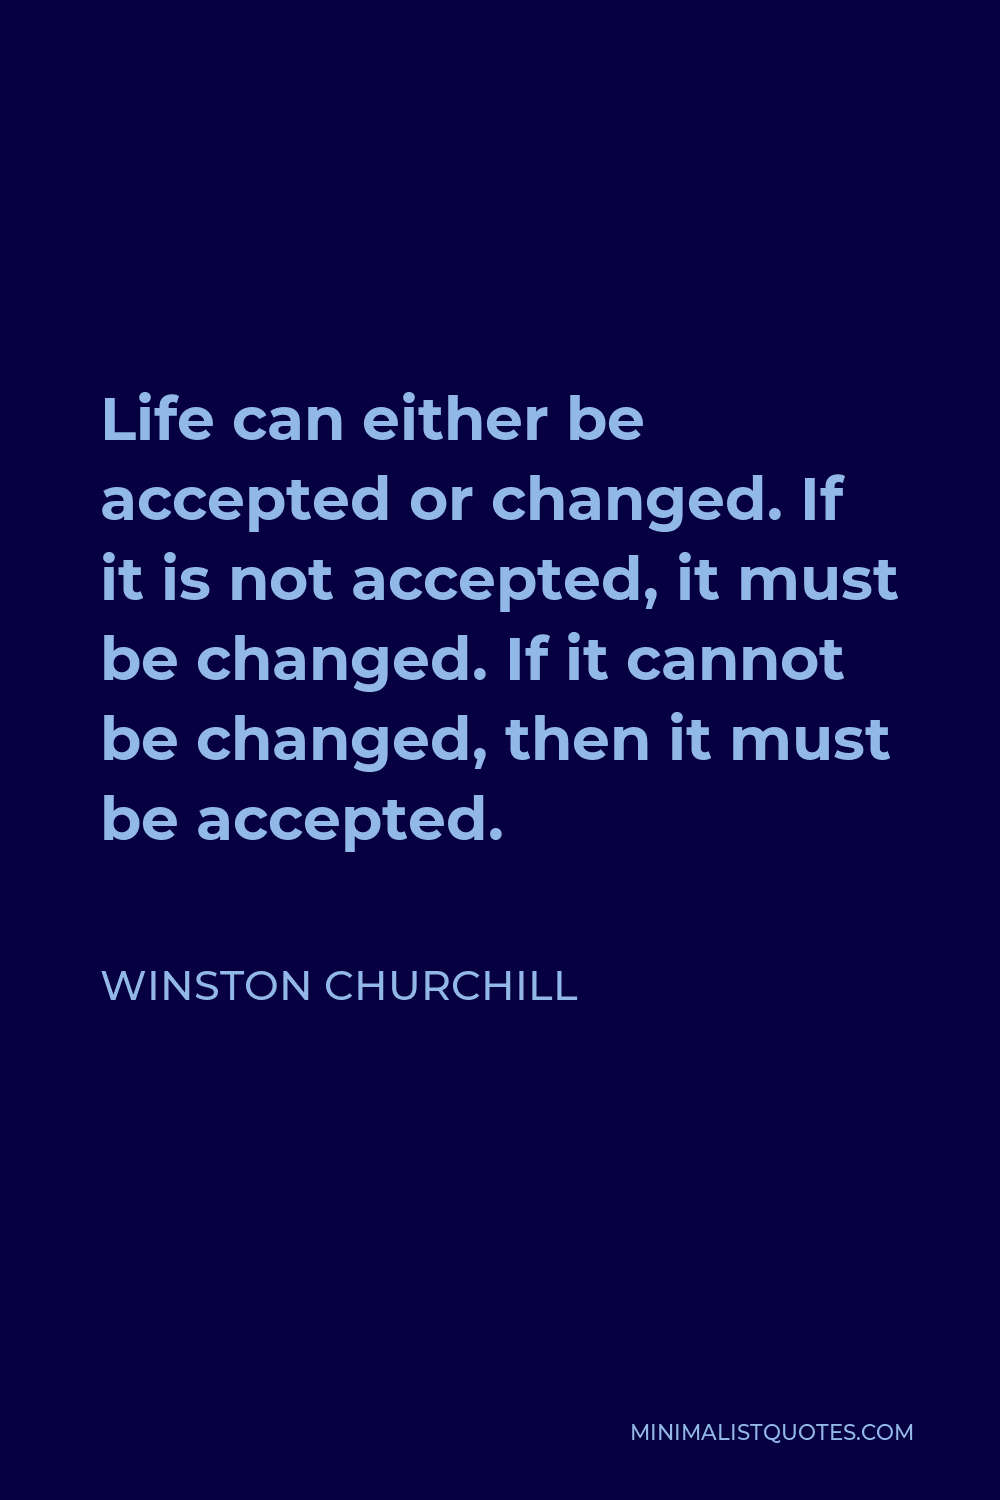 Winston Churchill Quote - Life can either be accepted or changed. If it is not accepted, it must be changed. If it cannot be changed, then it must be accepted.